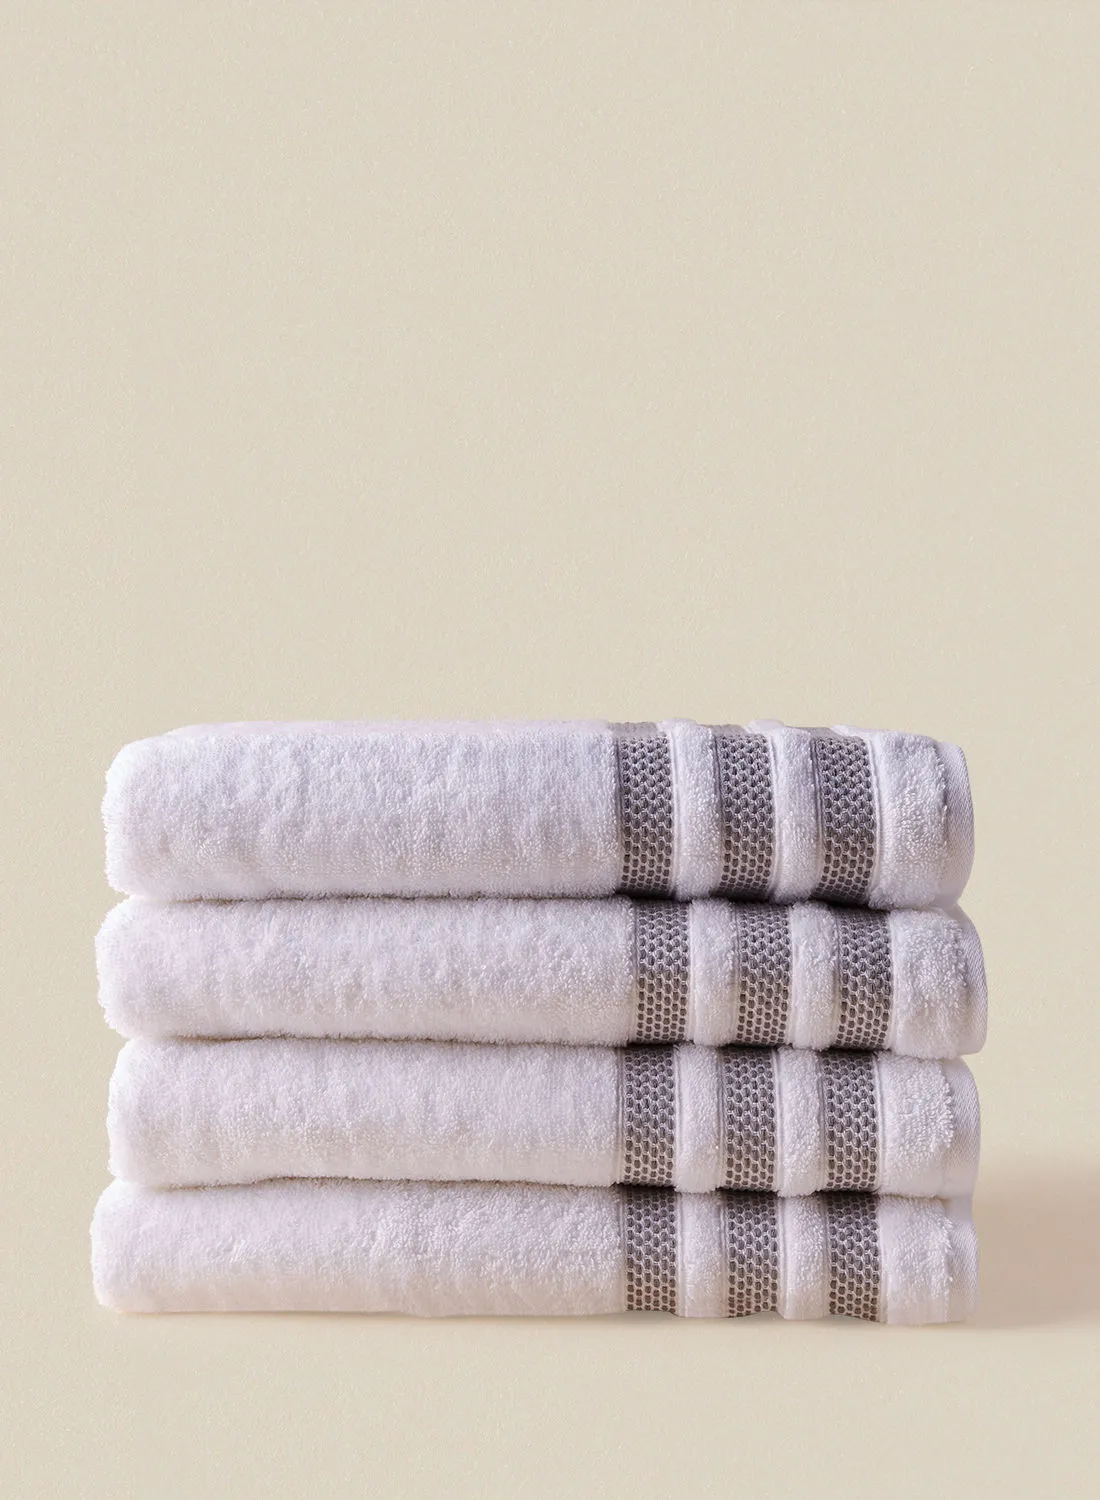 noon east 4 Piece Bathroom Towel Set - 500 GSM 100% Cotton Low Twist - 4 Bath Towel - White Color - Highly Absorbent - Fast Dry